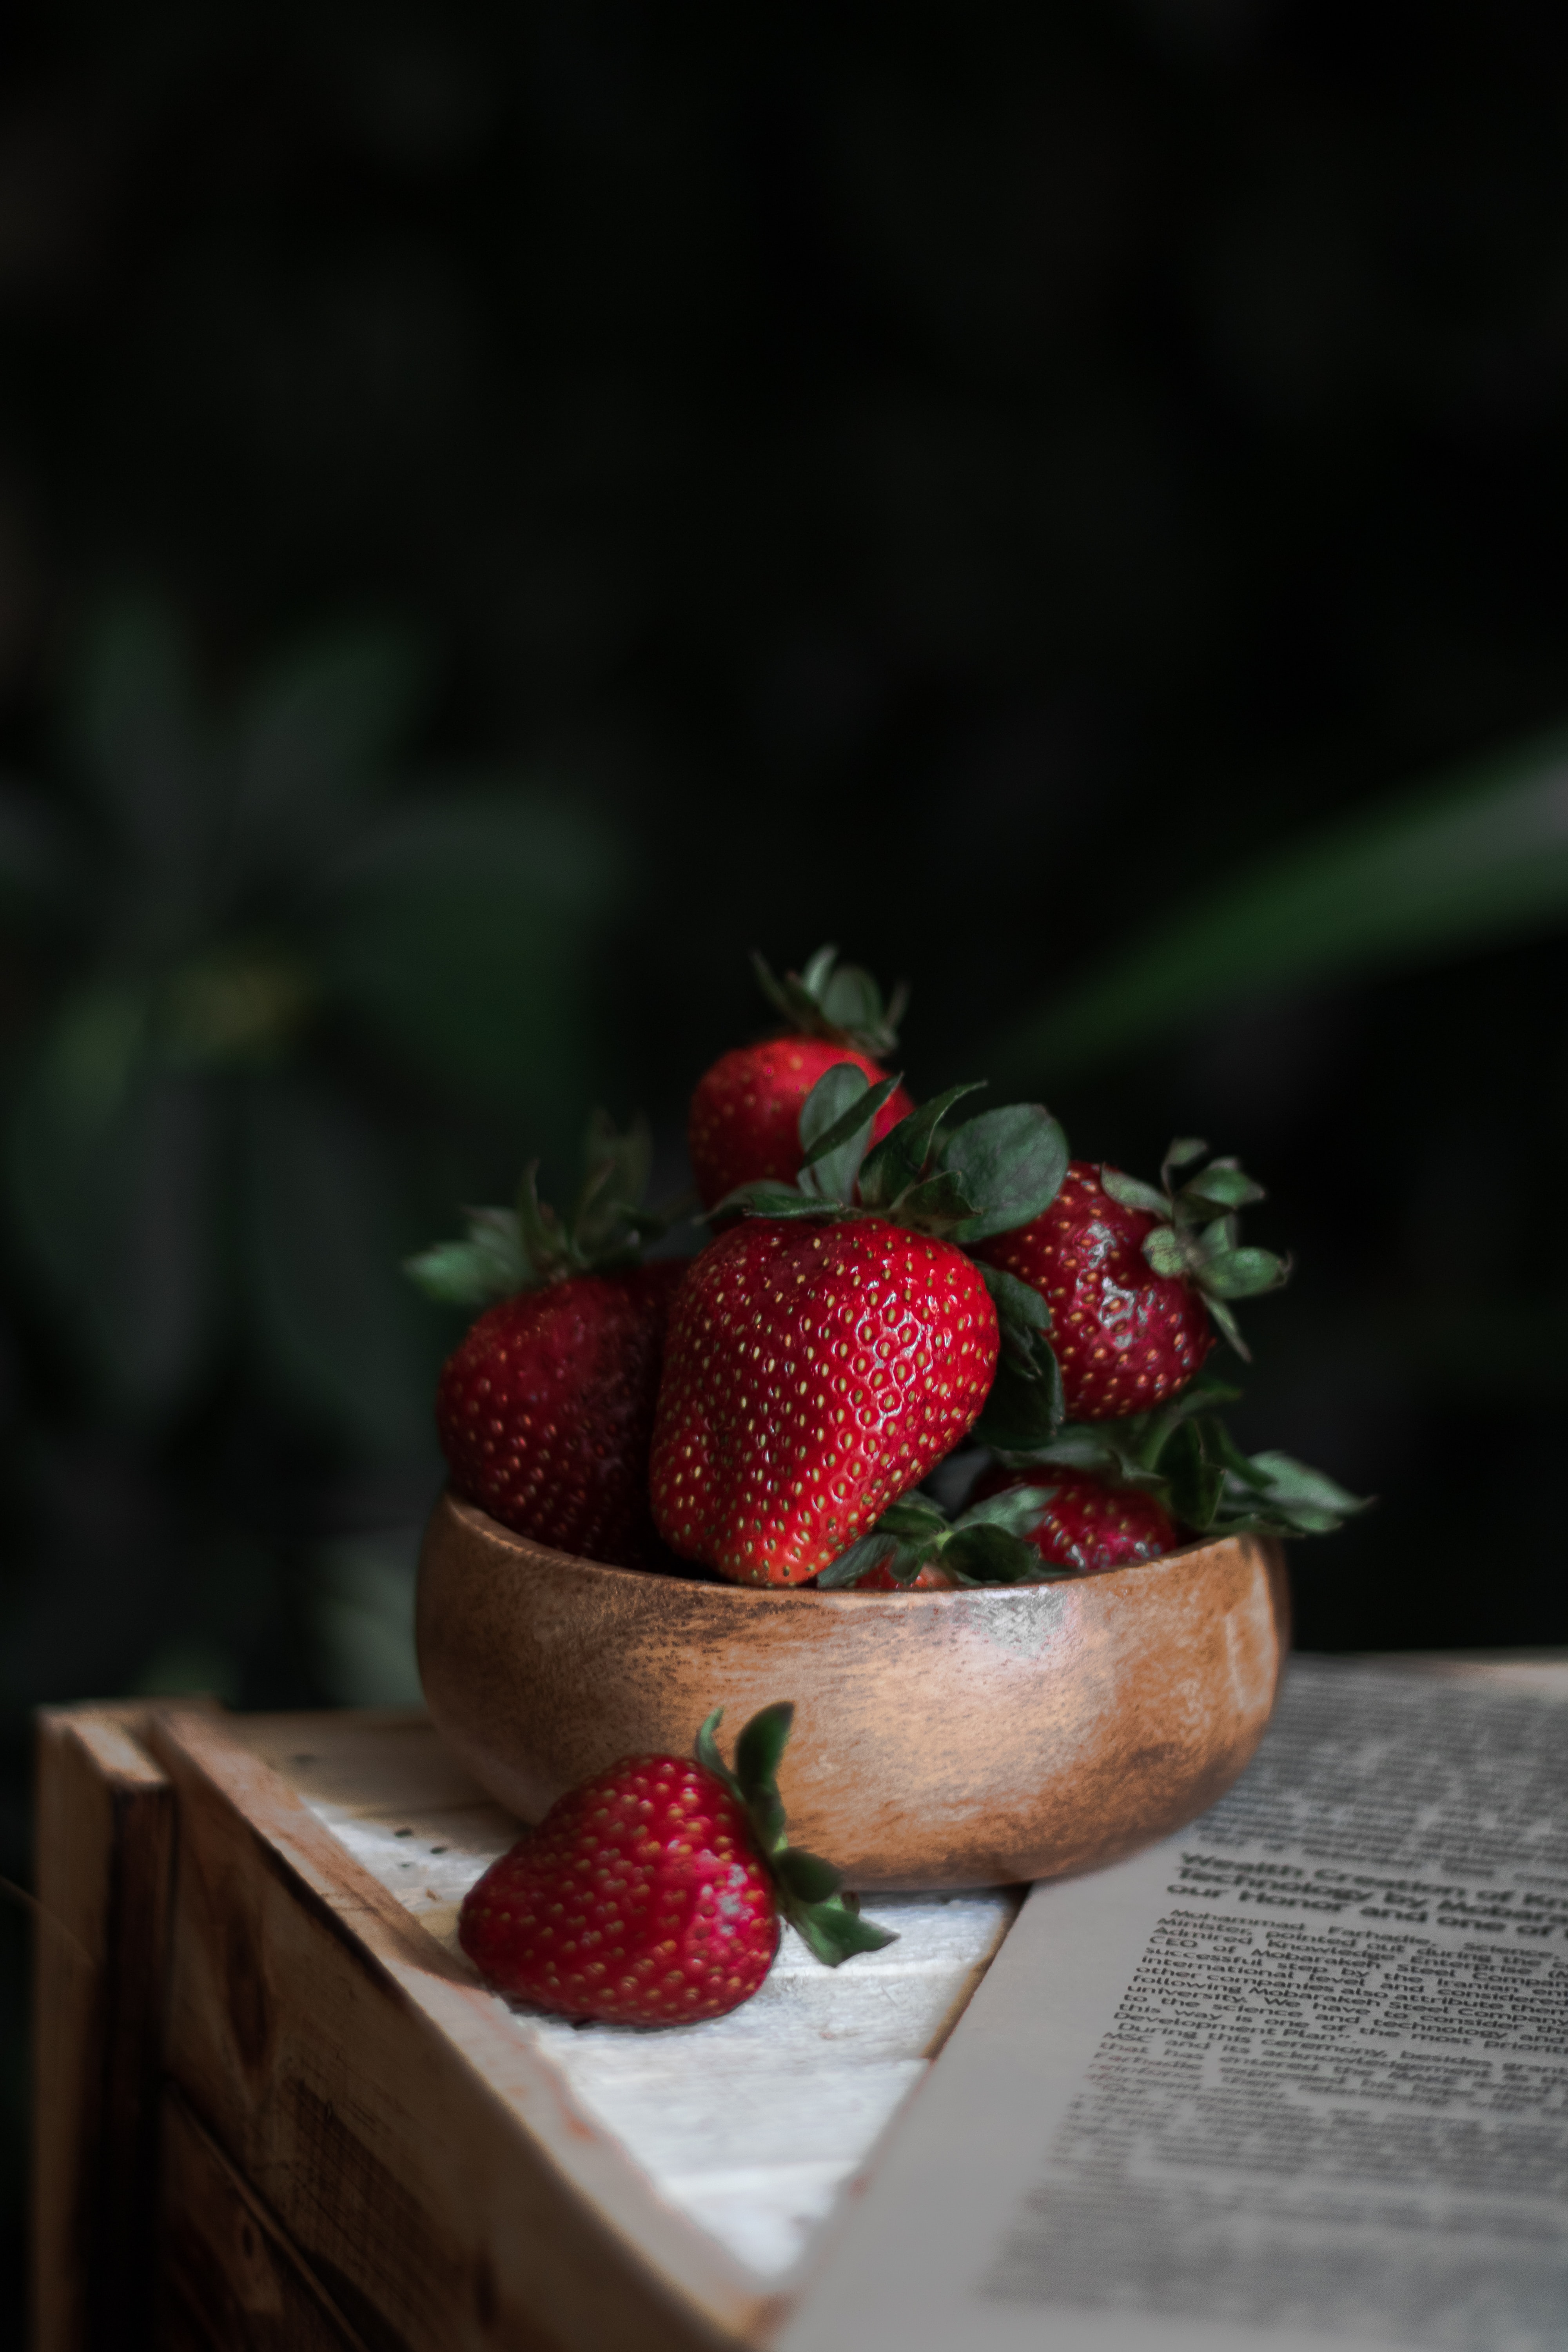 8k Strawberry Images